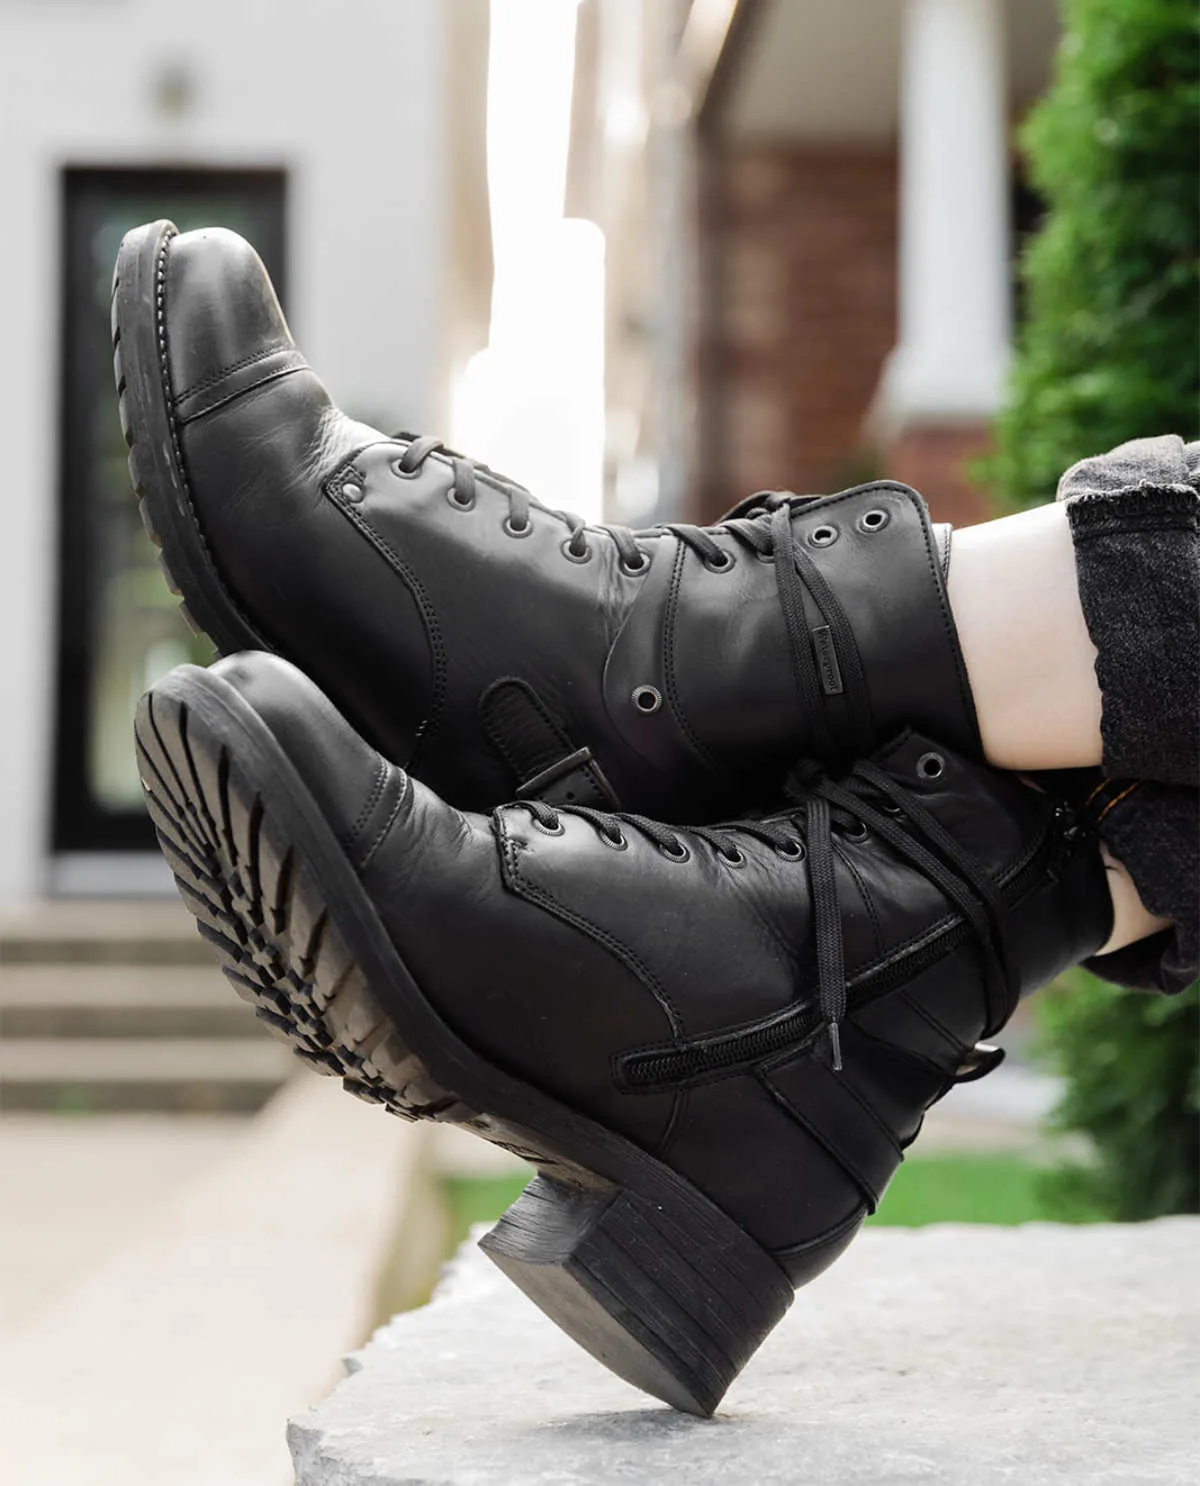 Cropped view of woman's crossed feet wearing Taos crave combat boots in black waterproof with cuffed grey jeans on a sidewalk.